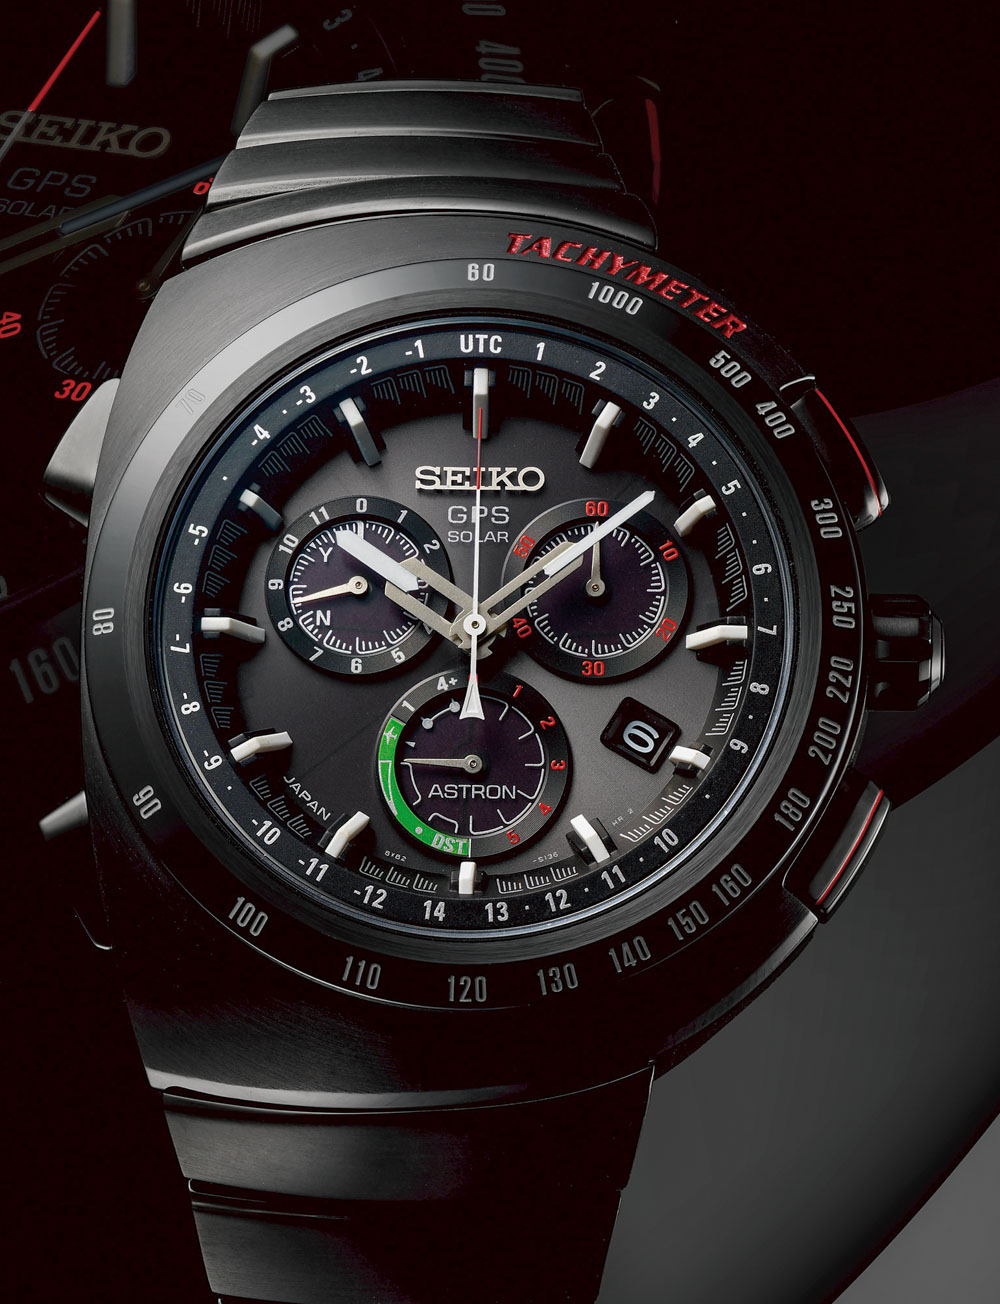 Seiko Astron Giugiaro Design Limited Edition SSE121 GPS Watch Watch Releases 